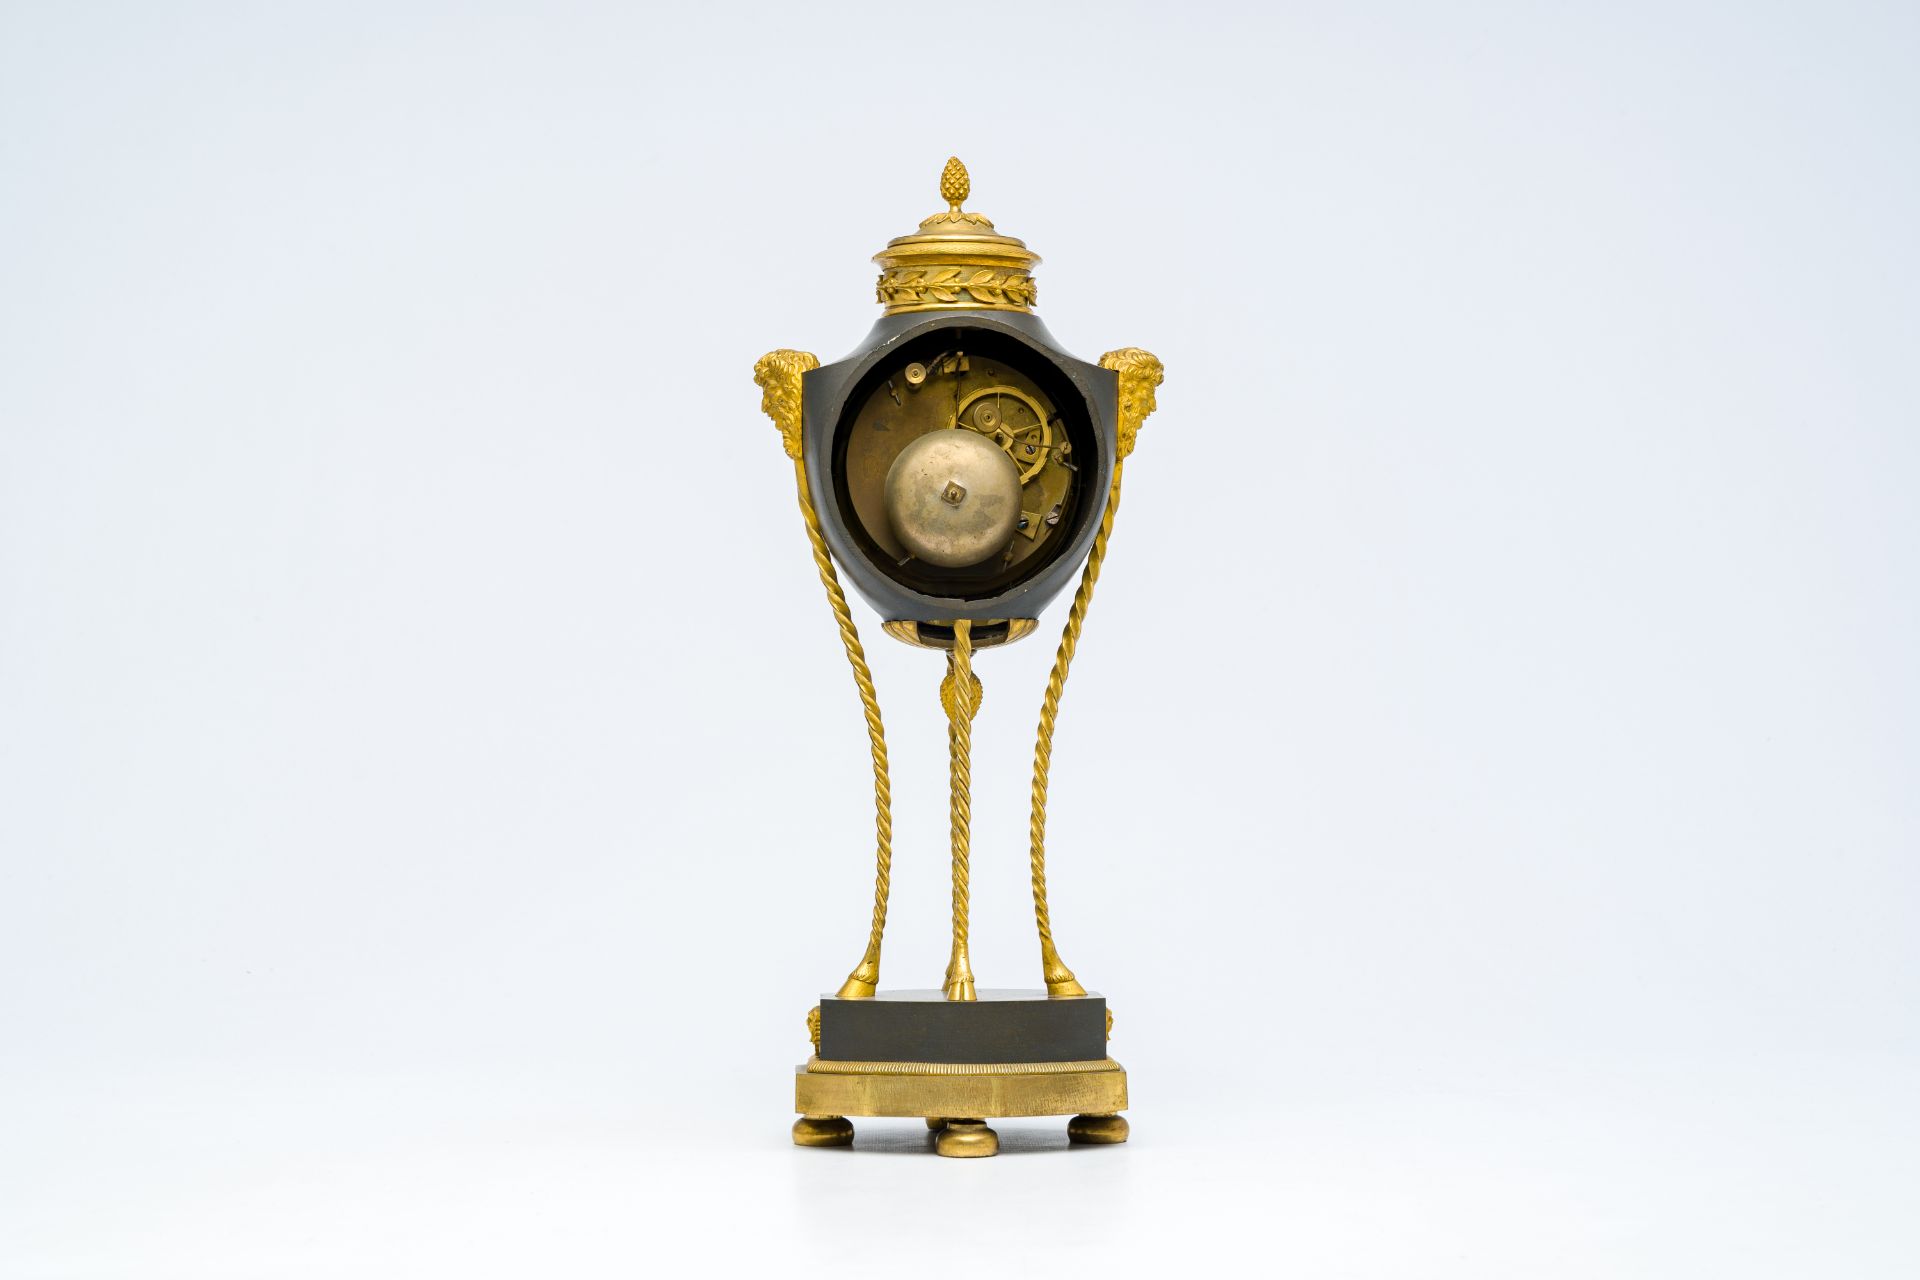 An elegant French Neoclassical patinated and gilt bronze mantel clock with mascarons, 19th C. - Image 5 of 9